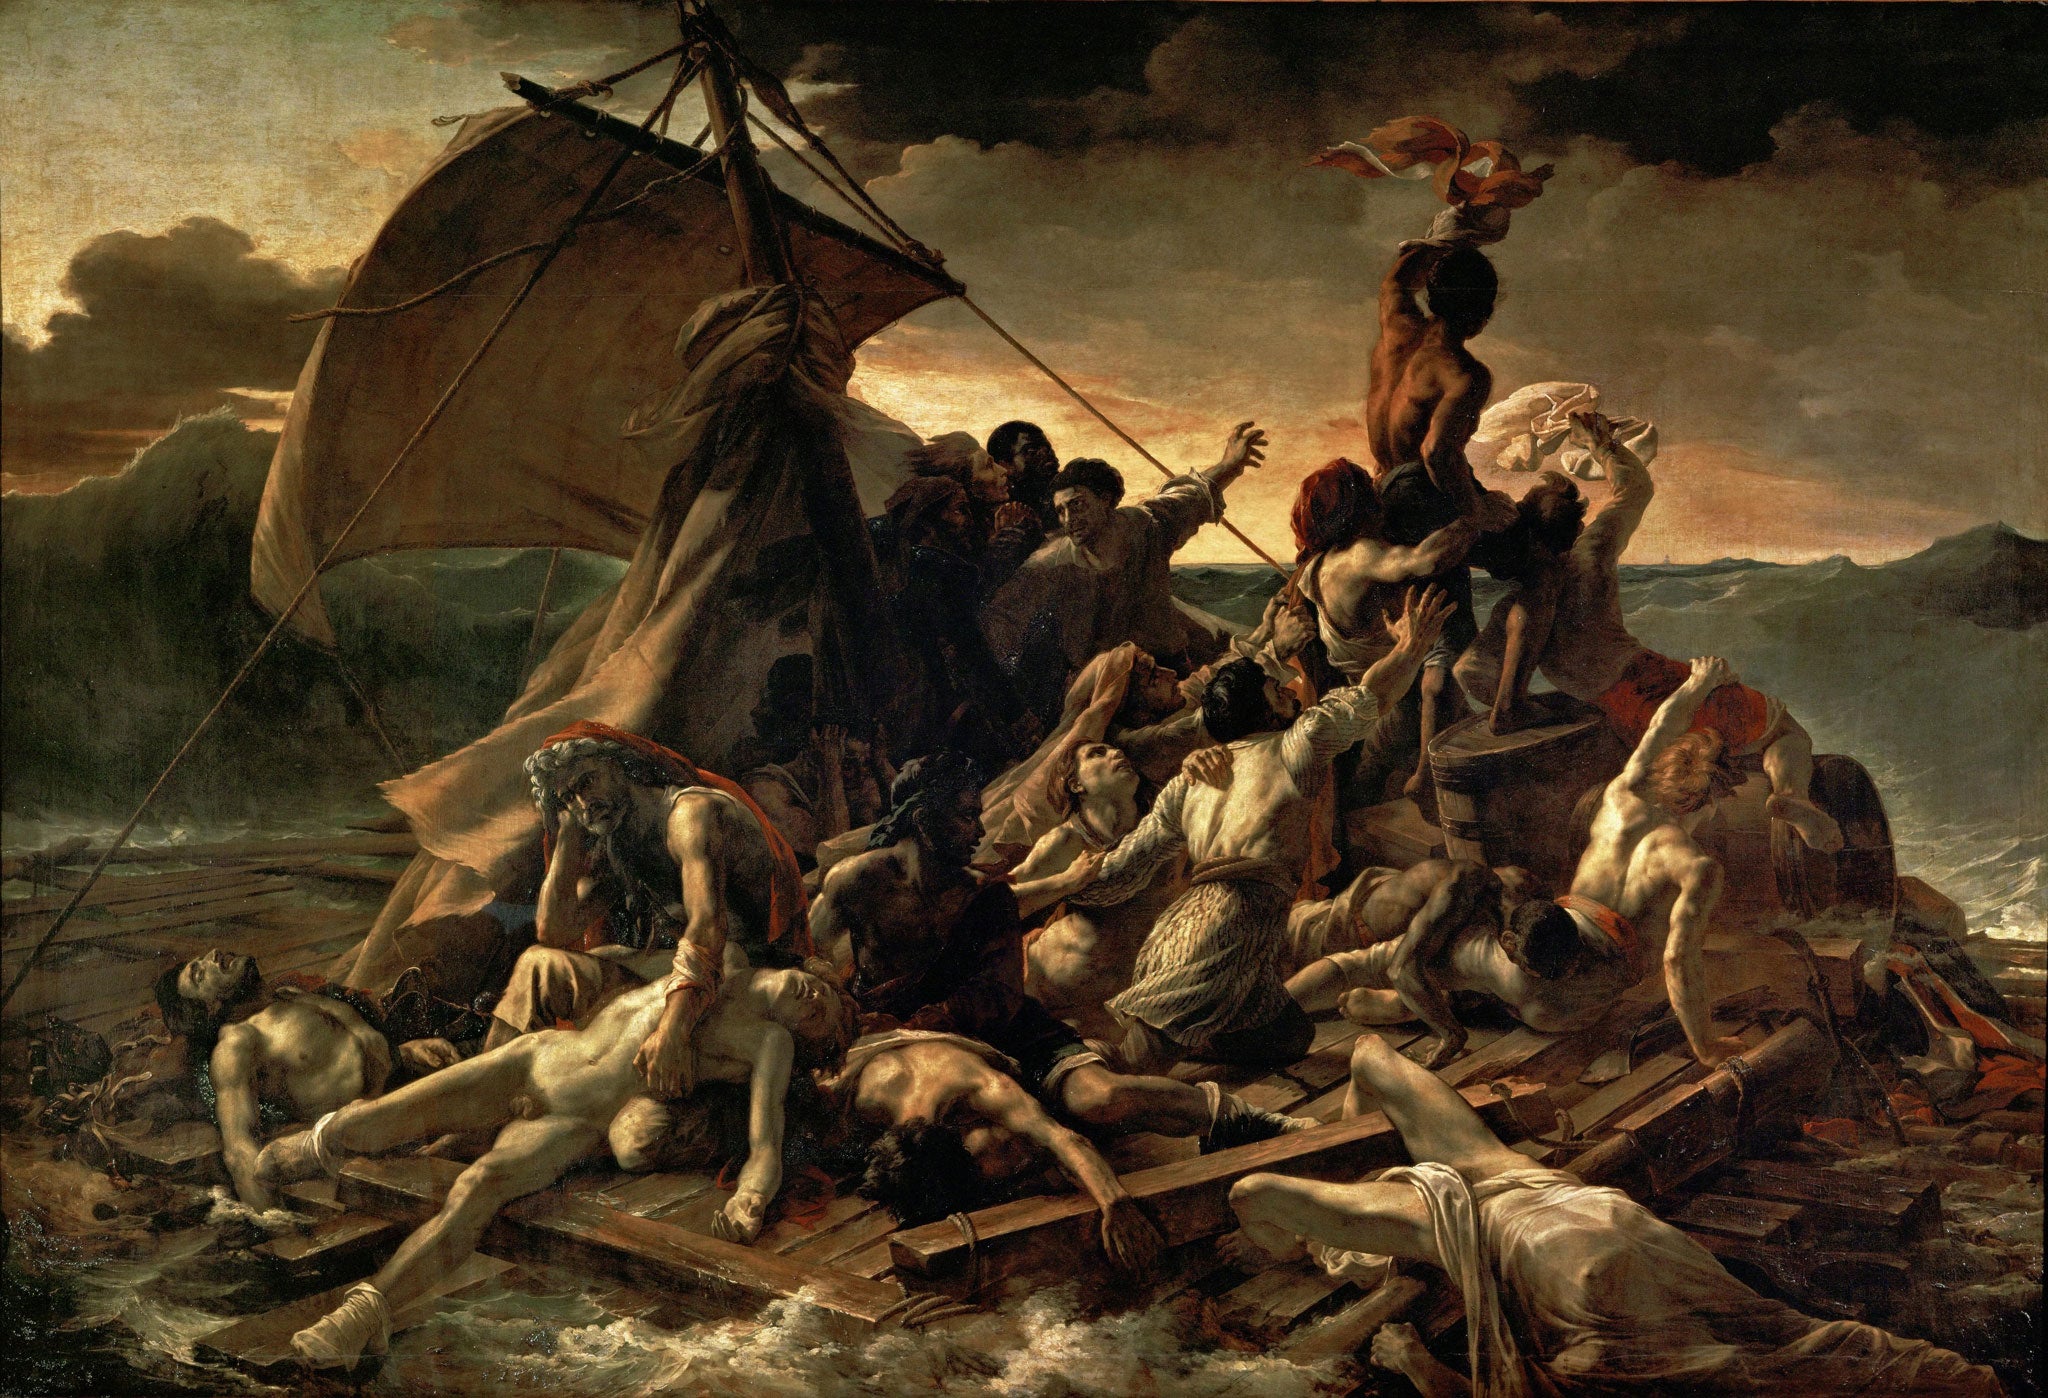 Théodore Géricault's 'Raft of the Medusa' (1818) revealed some of the horrors that took place on board – of 147 who took to the raft, only 30 survived the first 48 hours